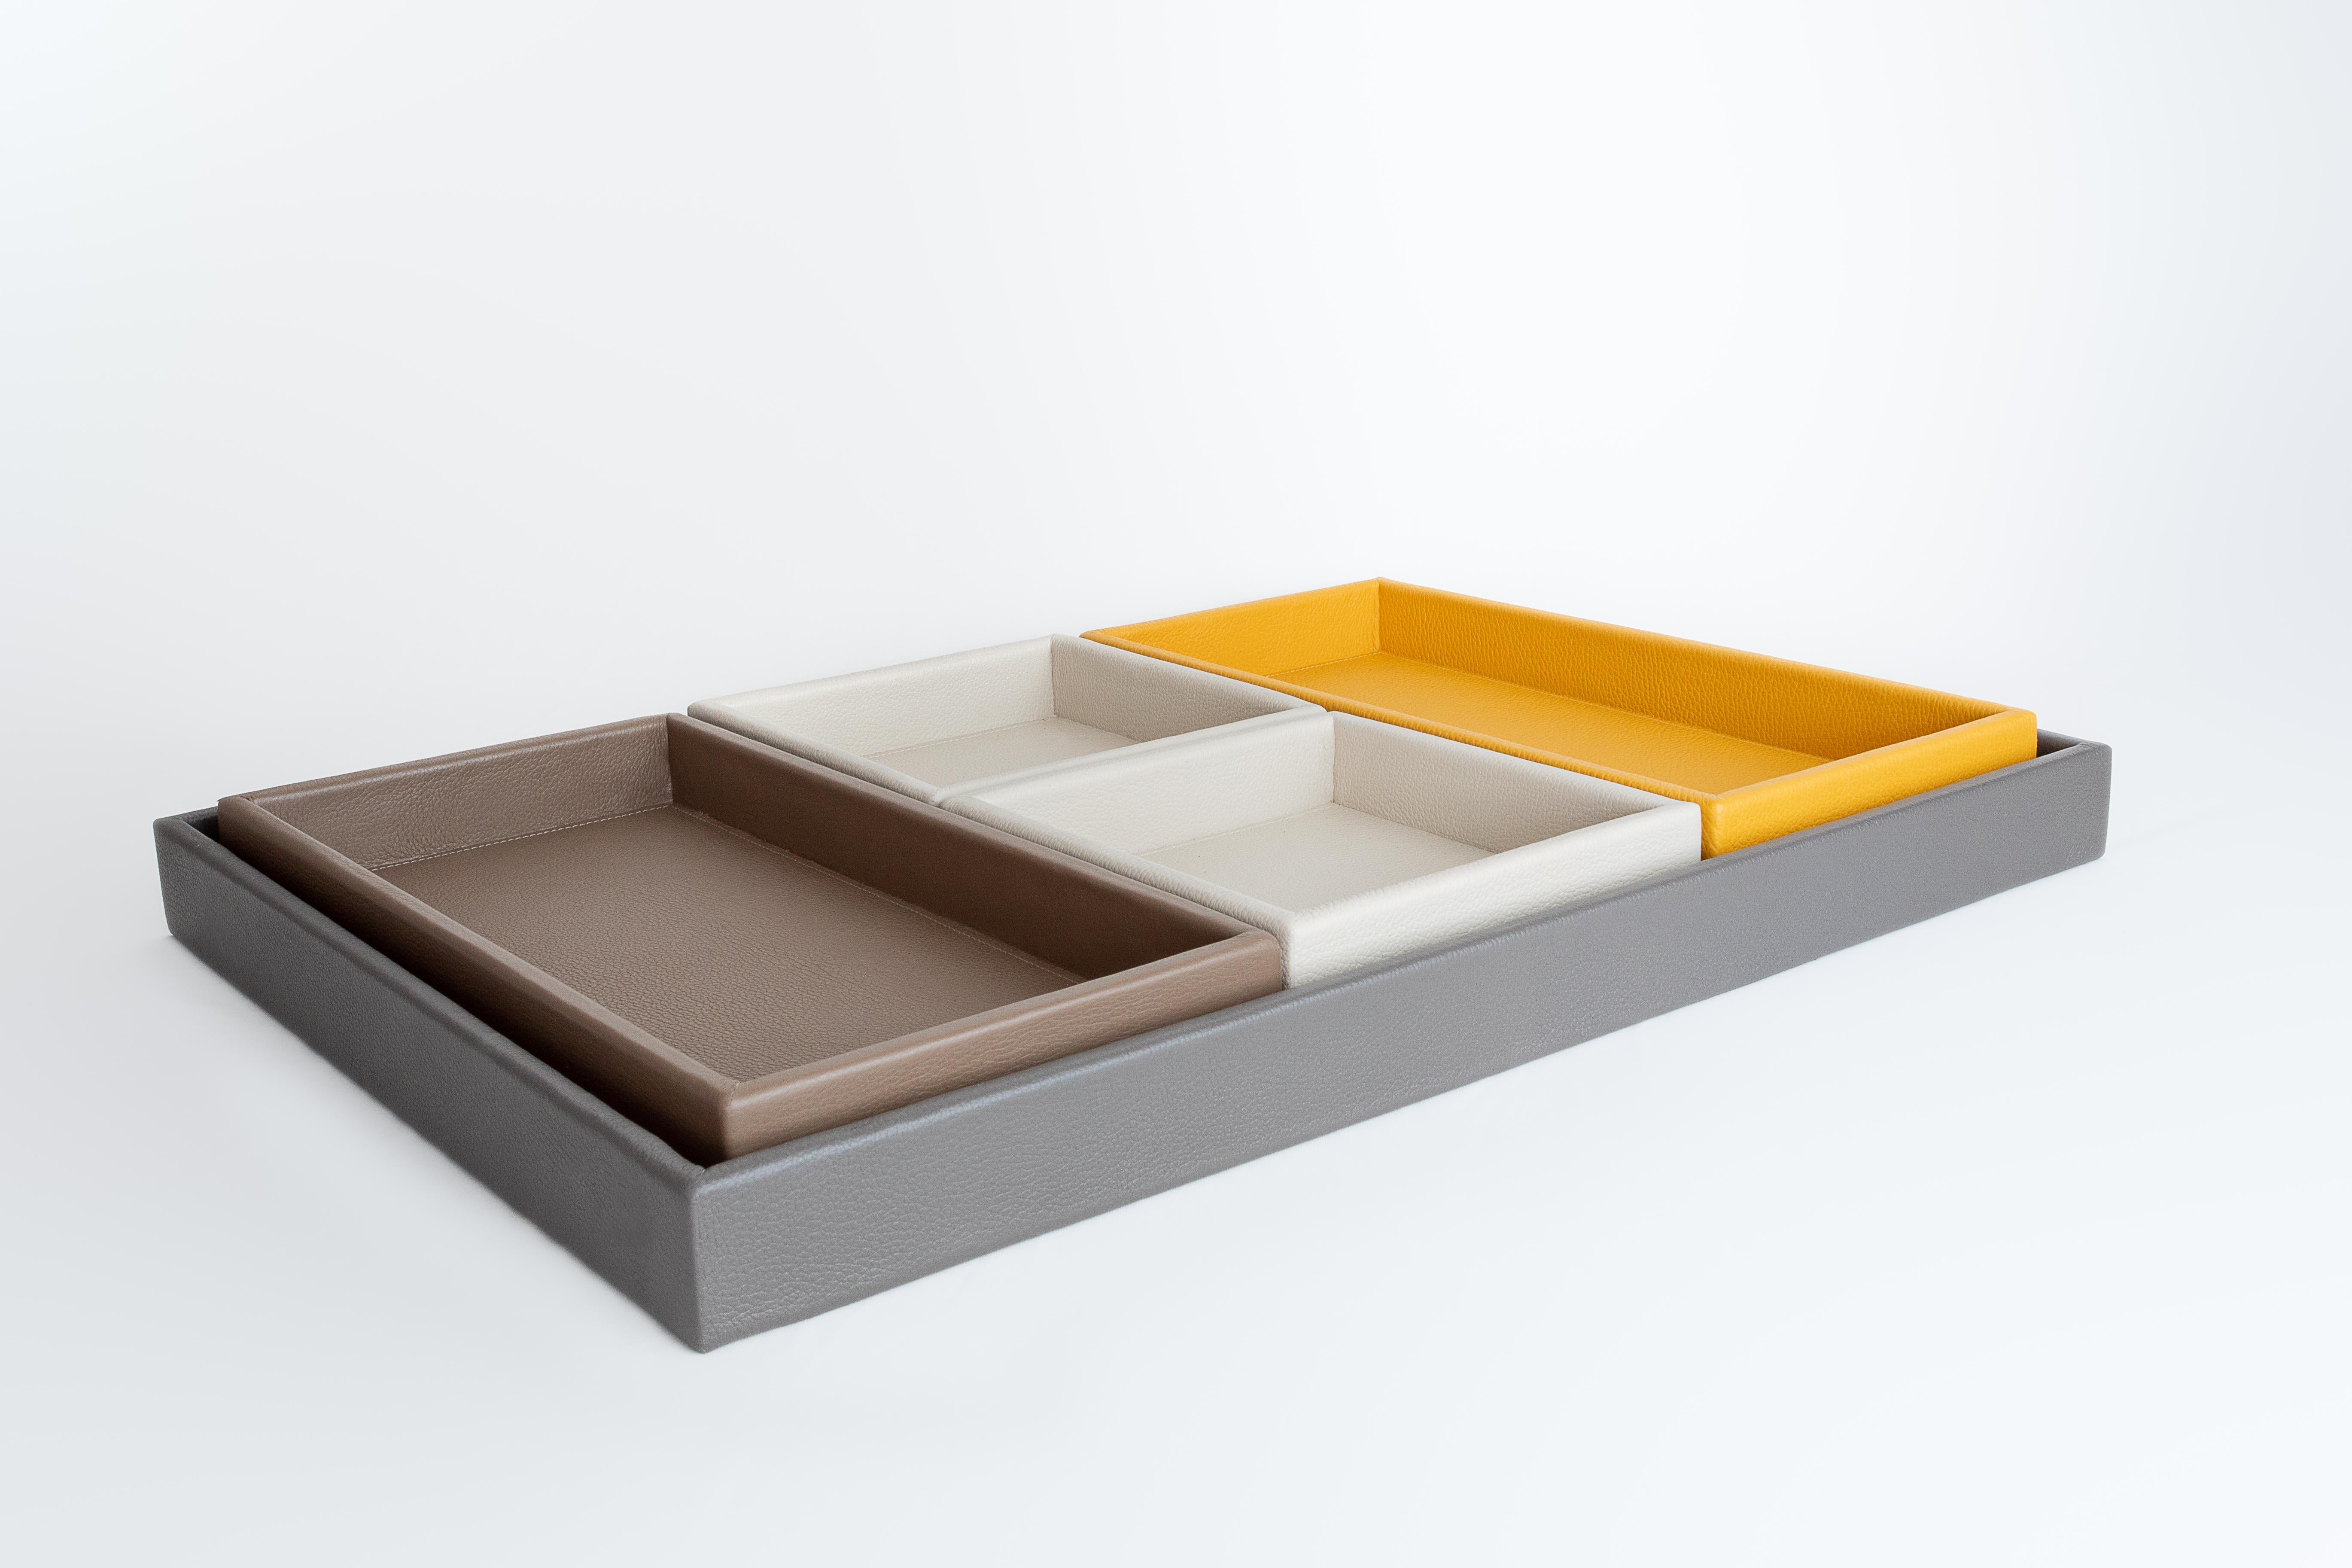 Table Tray Set - Set of 5 trays in different colors 

Include:
- 2 (two) Leather Tray, Small Square Tray Color: Vanilla 
Dimensions: 
Height: 1.58 in (4 cm)
Width: 6.89 in (17.5 cm)
Depth: 6.89 in (17.5 cm)

- 1 (one) Leather Tray, Medium A